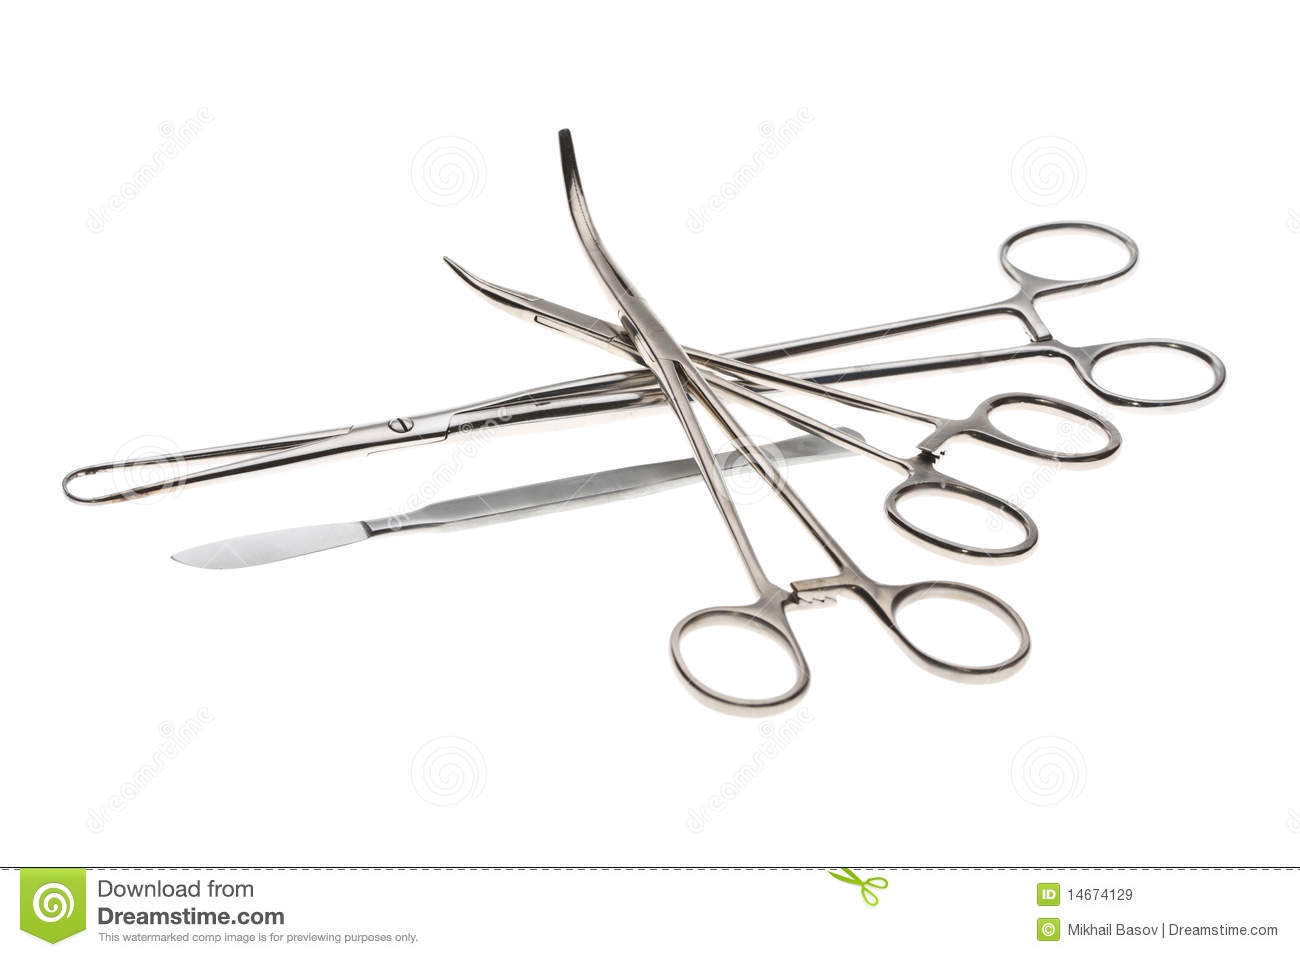 Surgical Instruments Royalty Free Stock Images   Image  14674129